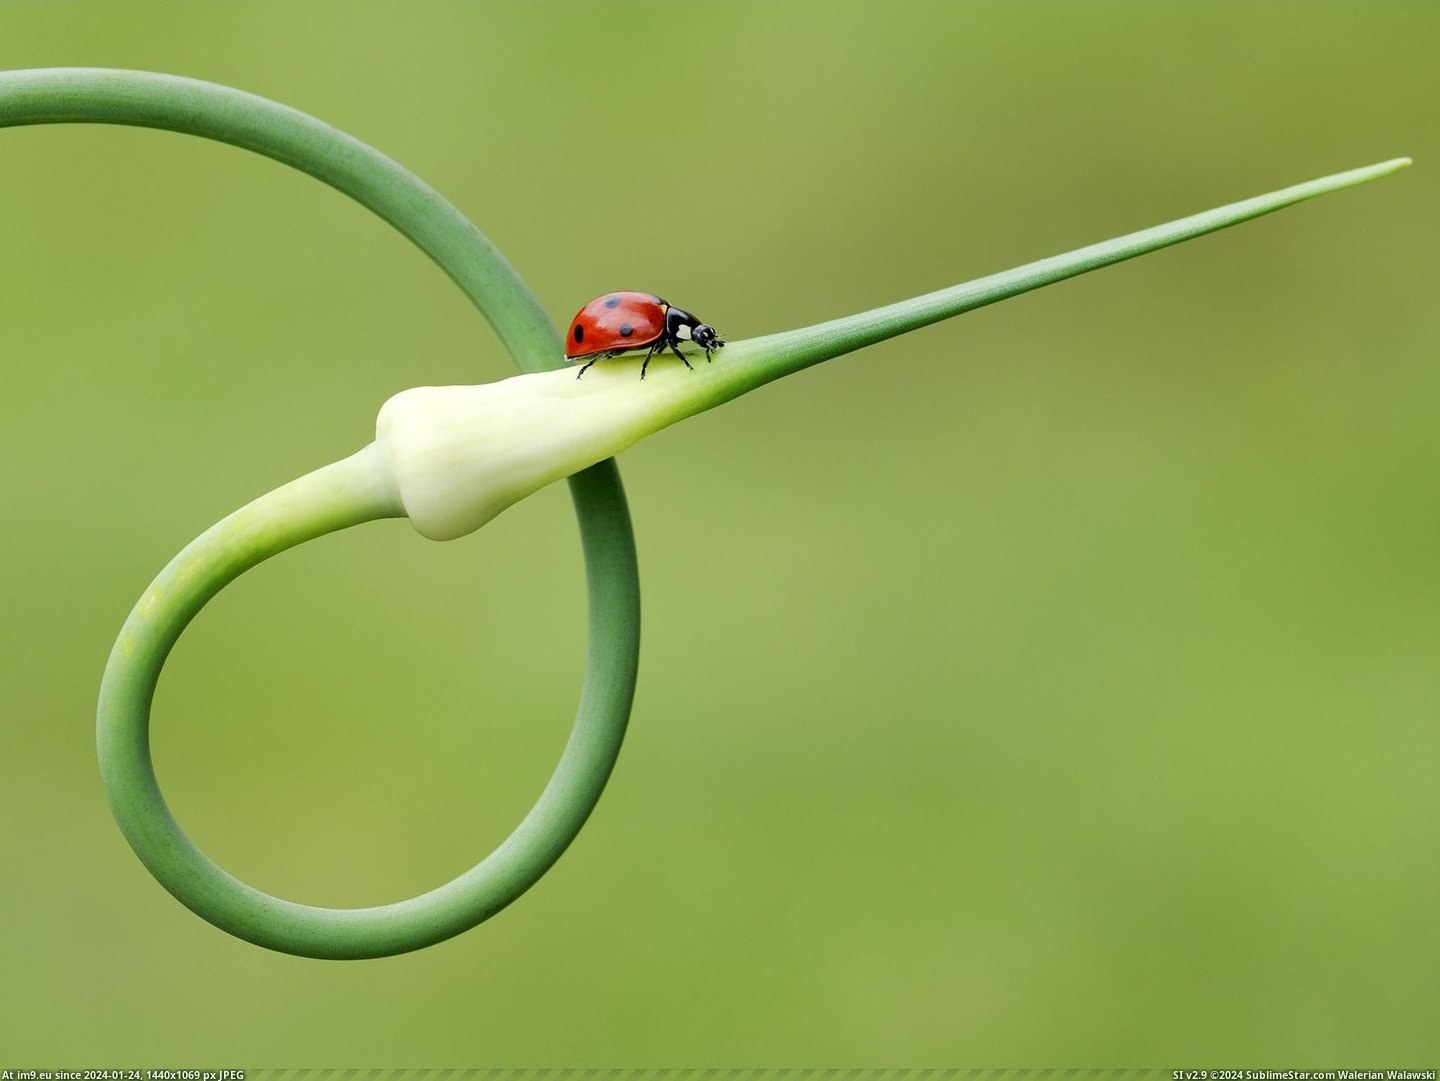 Seven-Spot Ladybird on a Garlic Plant (in Beautiful photos and wallpapers)